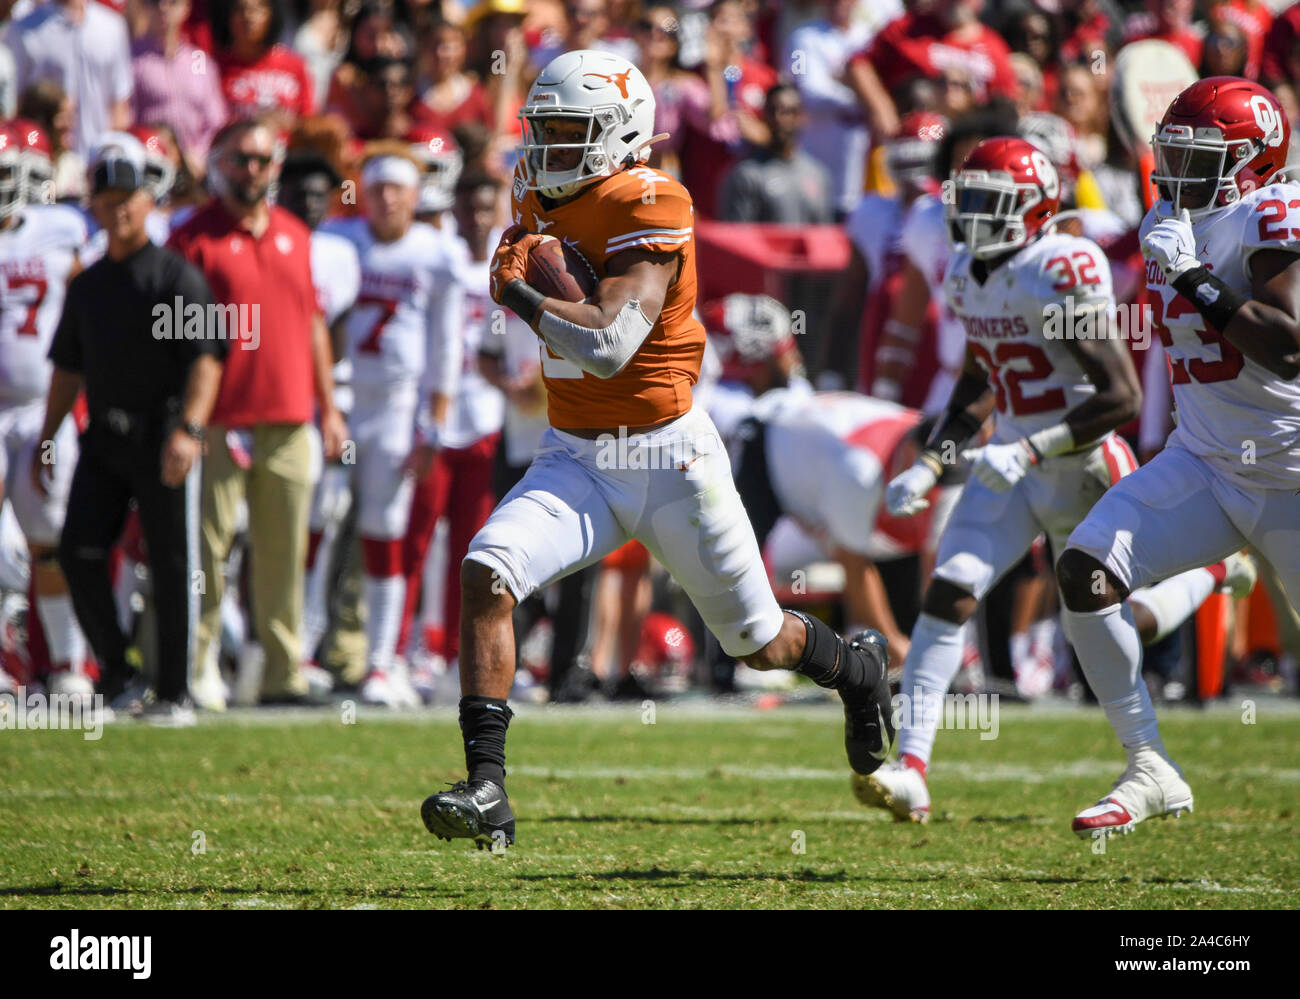 Oct 12, 2019: Texas Longhorns quarterback Roschon Johnson #2 carries the ball for a touchdown during the NCAA Red River Rivalry game between the University of Oklahoma Sooners and the University of Texas Longhorns at the Cotton Bowl Stadium at Fair Park in Dallas, TX Oklahoma defeated 34-27 Albert Pena/CSM Stock Photo